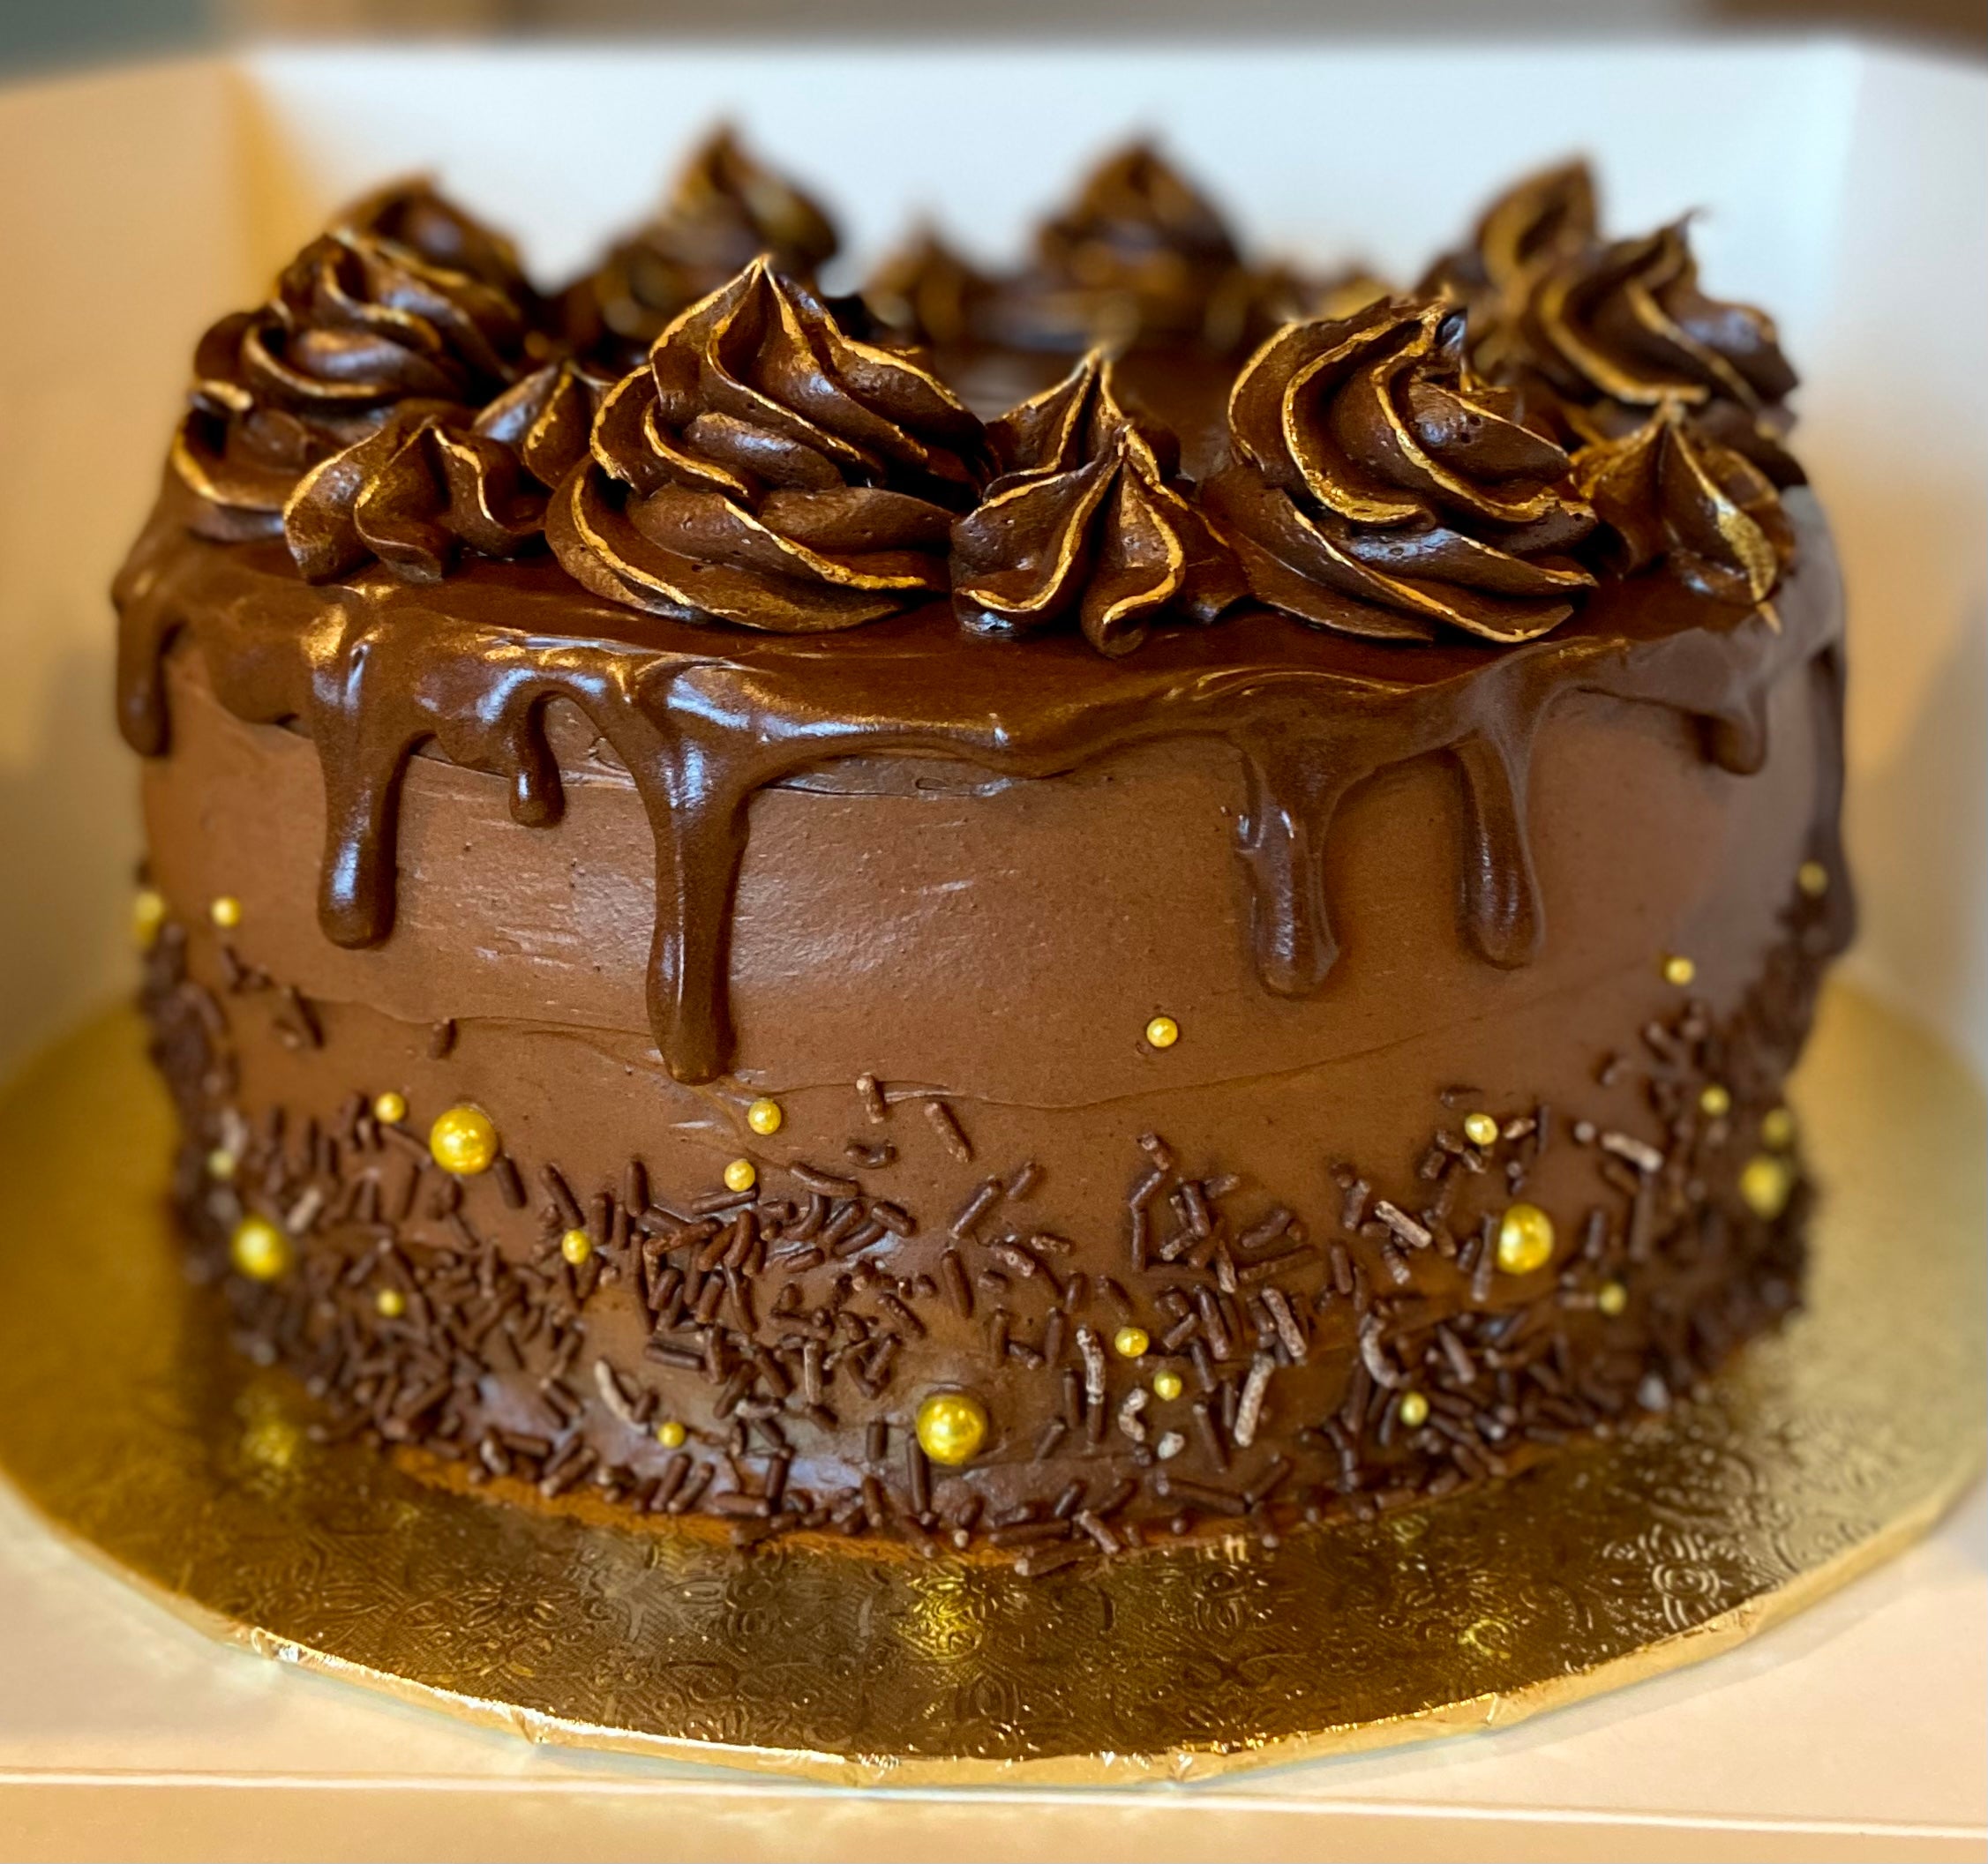 Chocolate fudge cake with gold accents